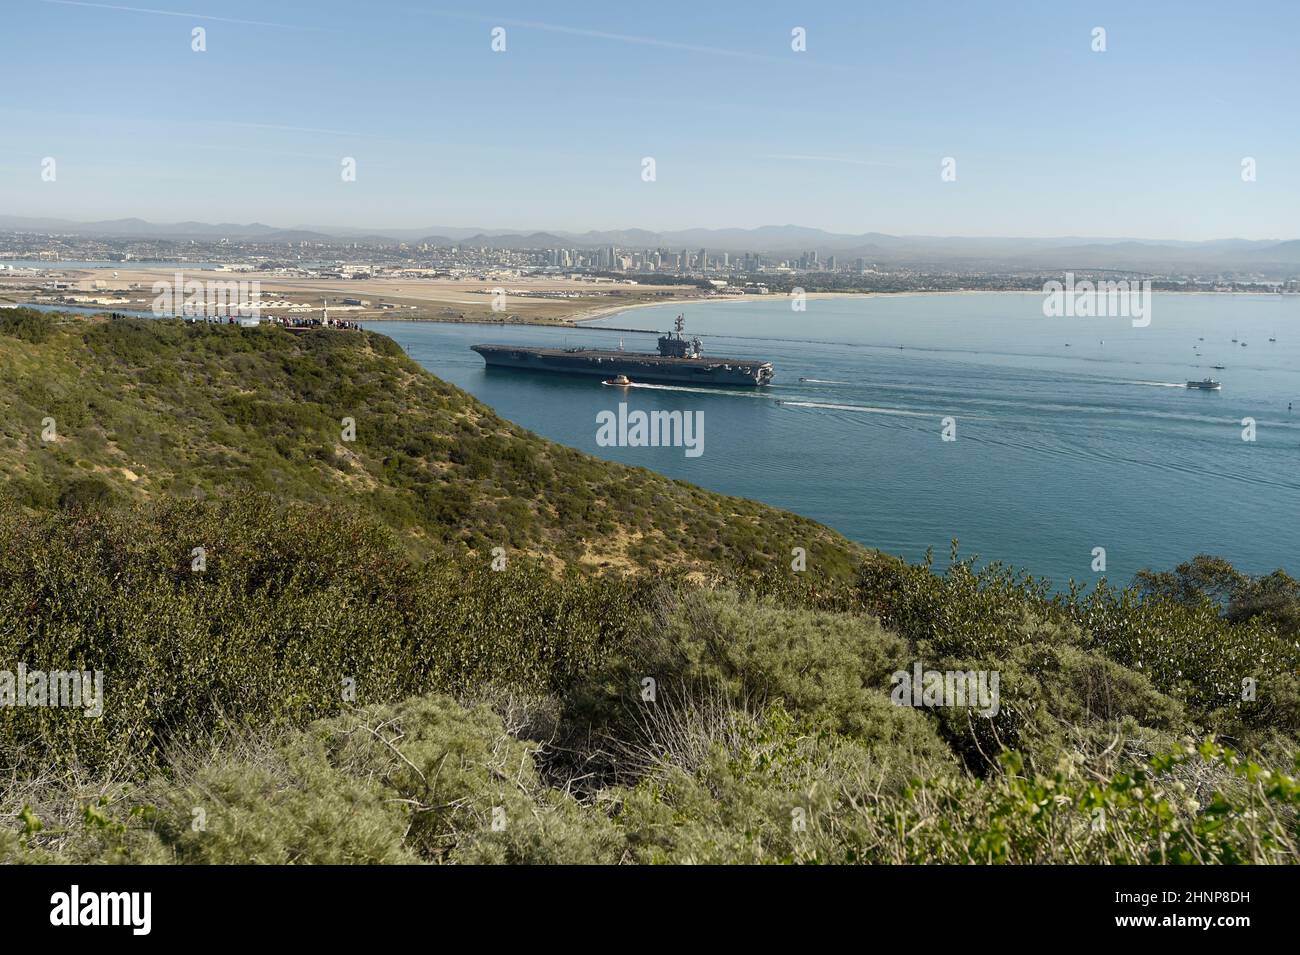 USS Carl Vinson (CVN 70) returns home after an eight month deployment. Cabrillo National Monument in foreground, NAS North Island in background. Stock Photo